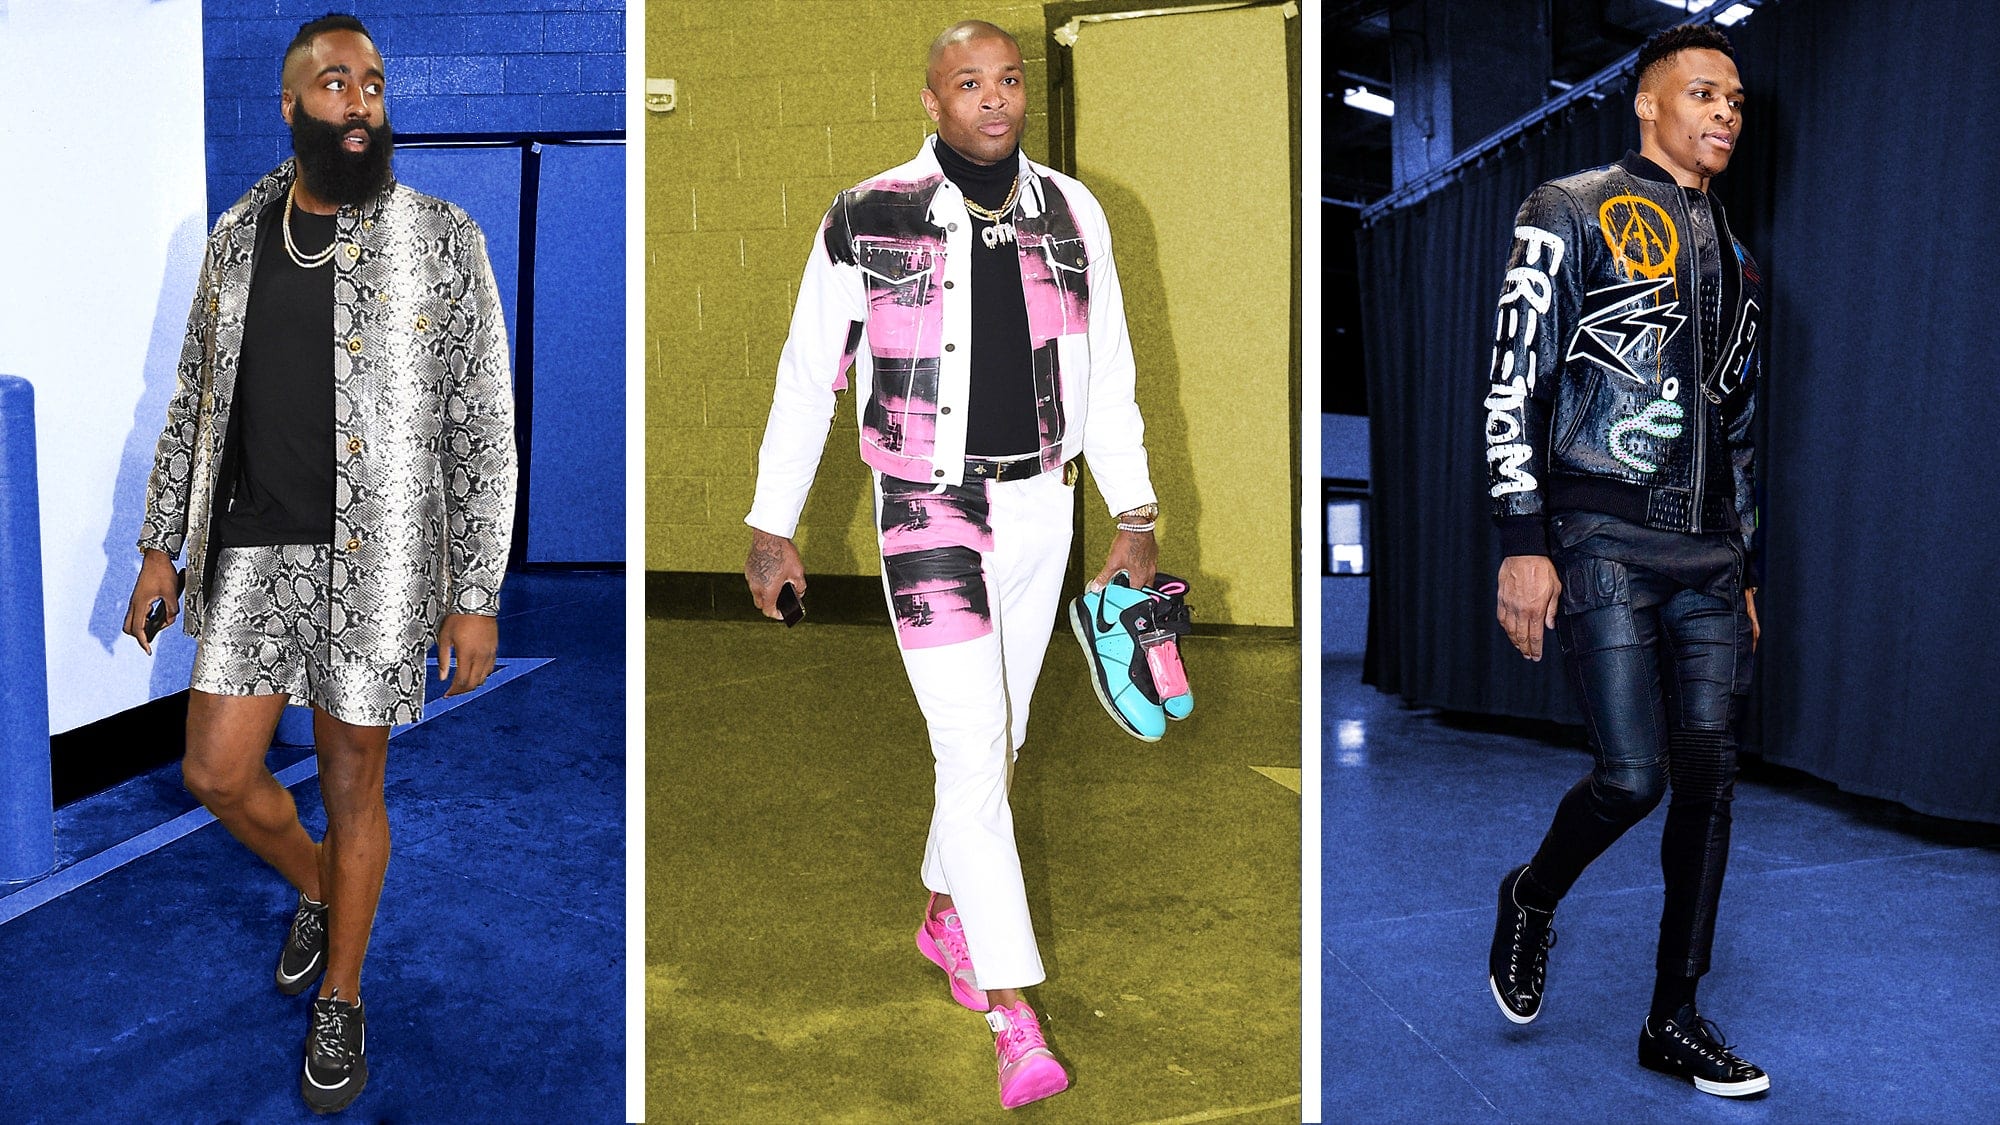 NBA Players Will Be Free to Make Pre-Game Fashion Statements After All